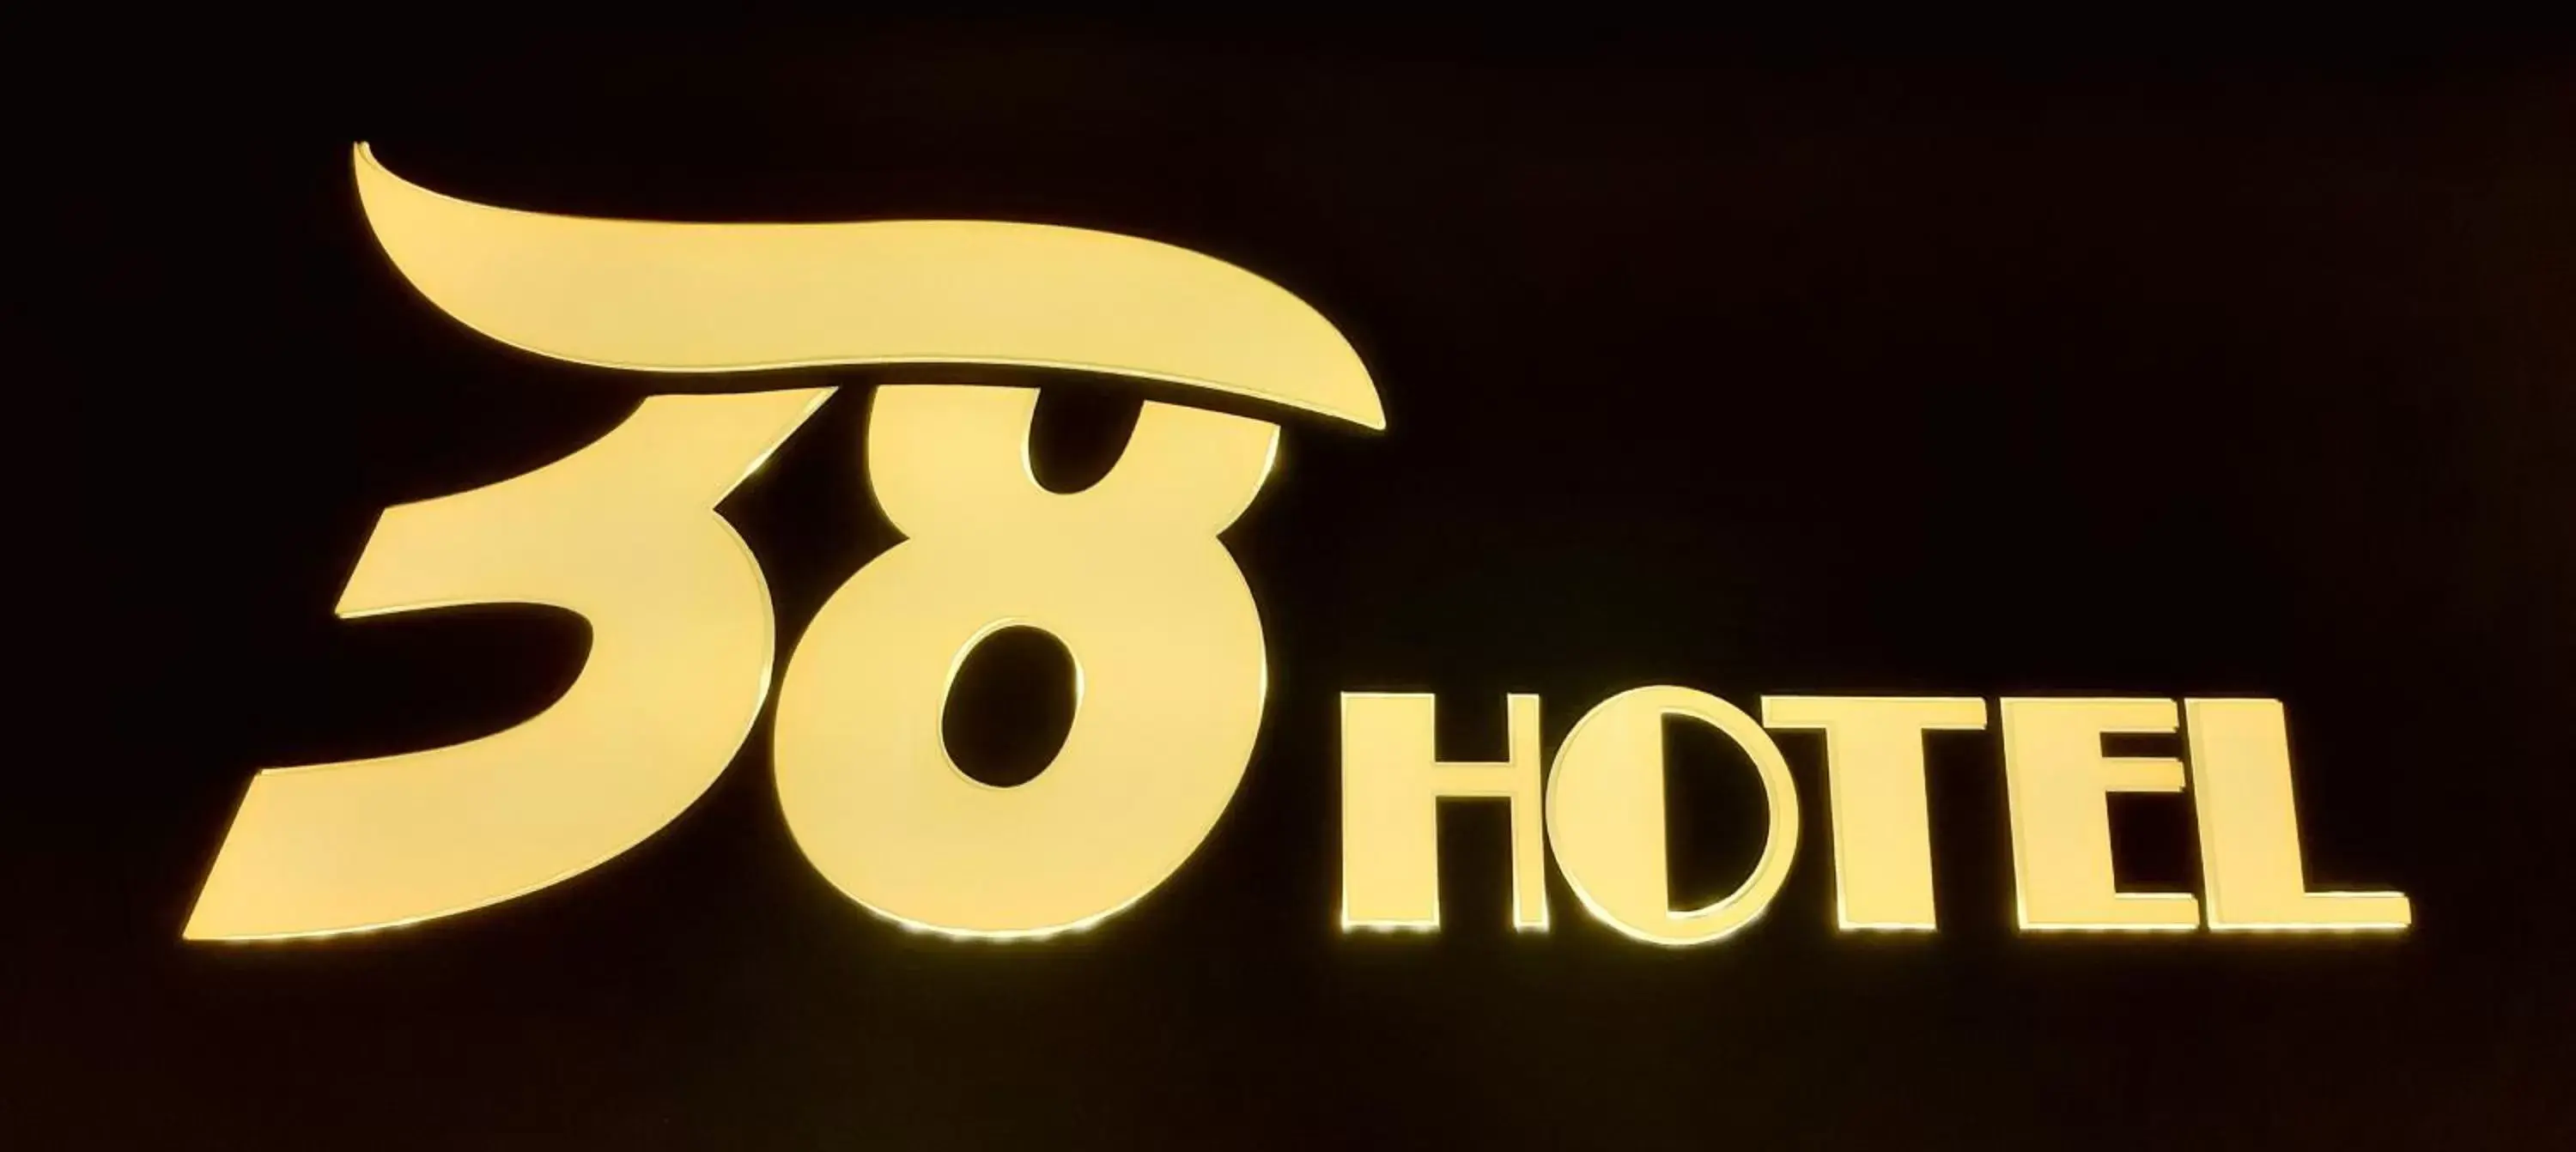 Property logo or sign in 38 Hotel